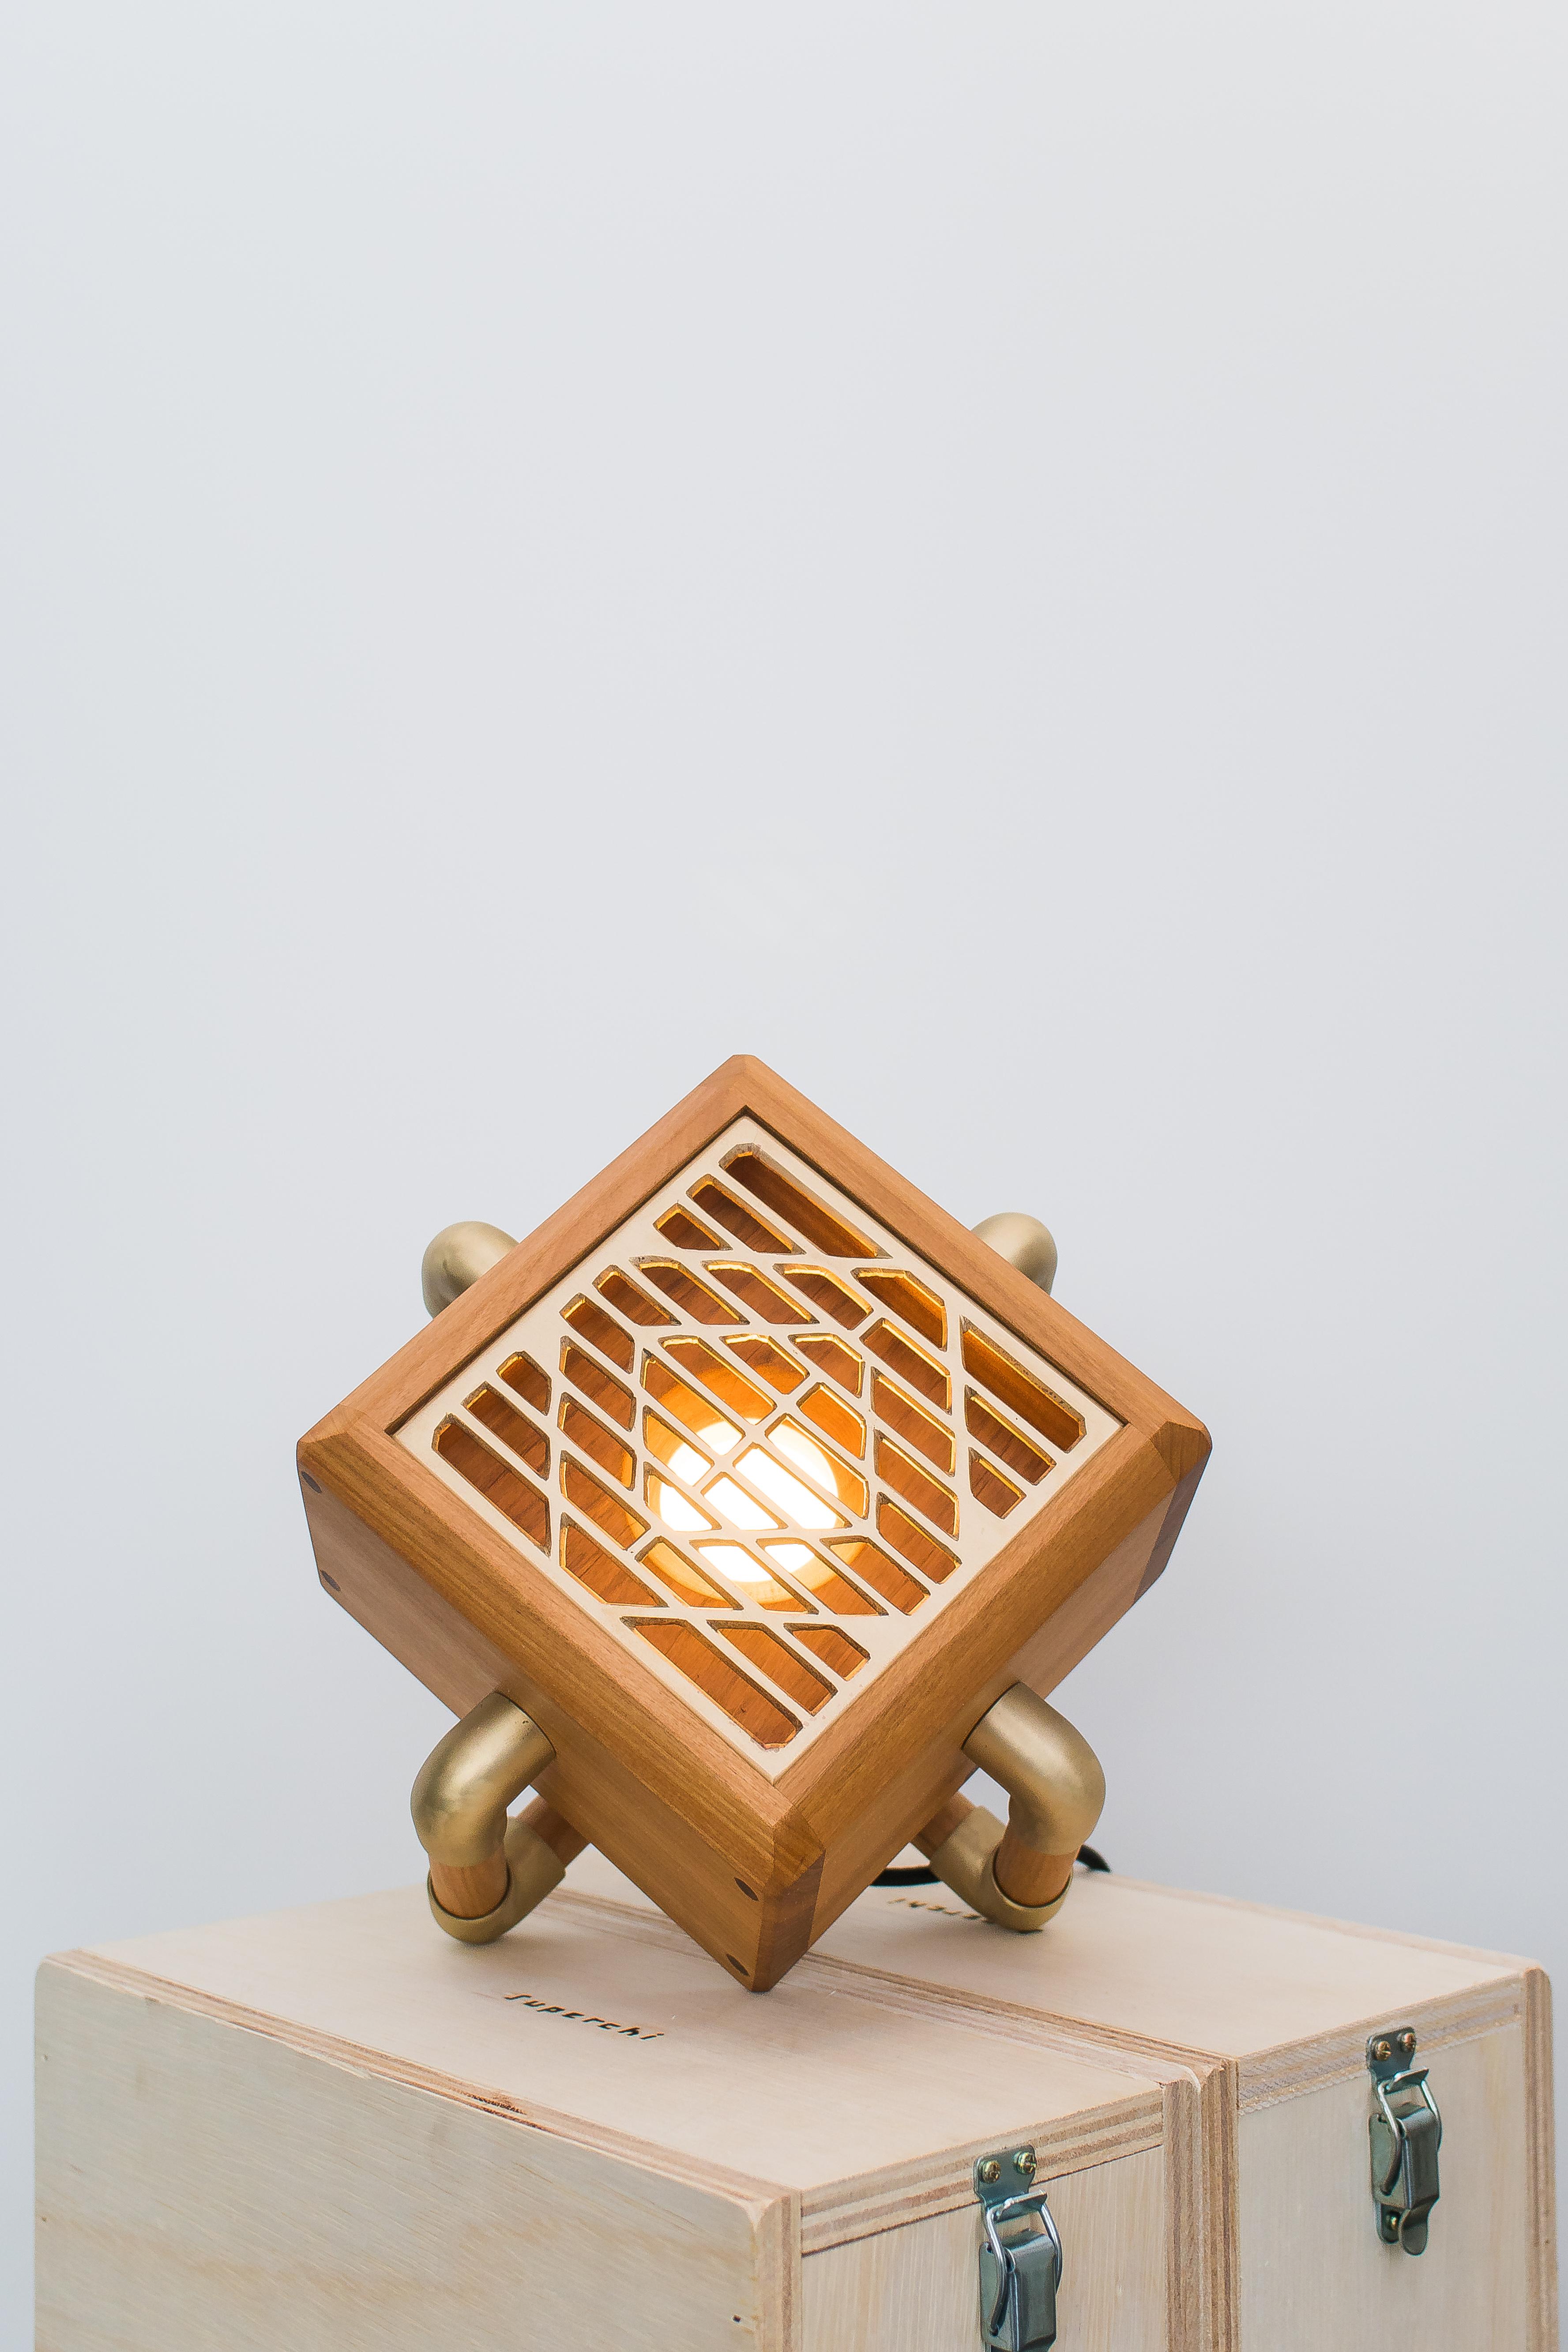 Drenare table lamp by Caio Superchi
Dimensions: D28 x W28 x H22 cm 
Materials: Solid Peroba do Campo wood + grid and brass connections + 6w led

All our lamps can be wired according to each country. If sold to the USA it will be wired for the